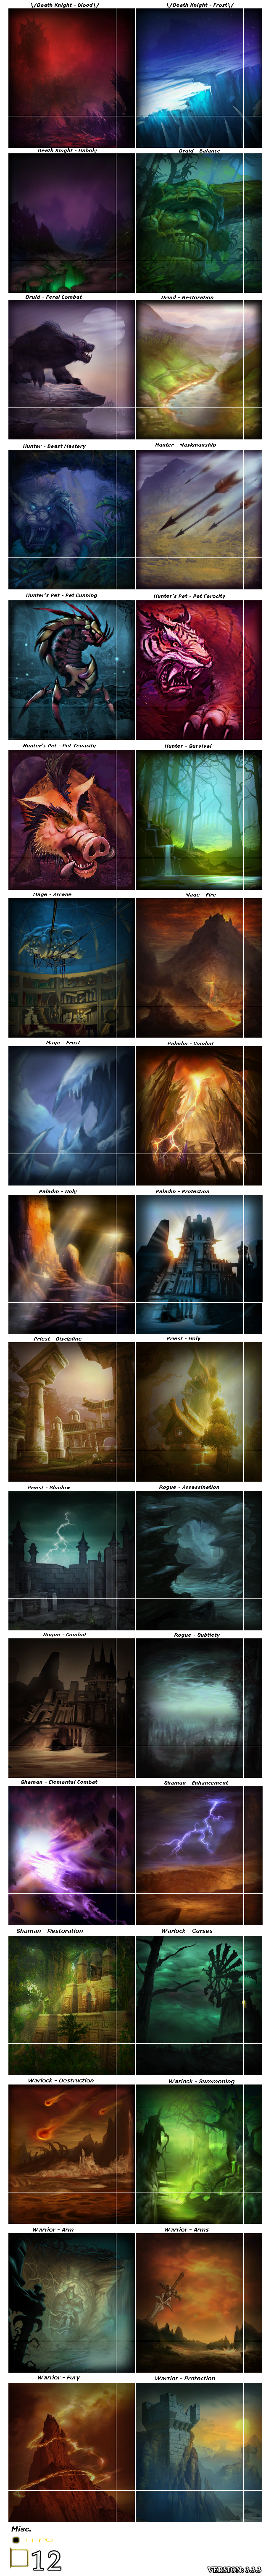 World of Warcraft - Talents Backgrounds